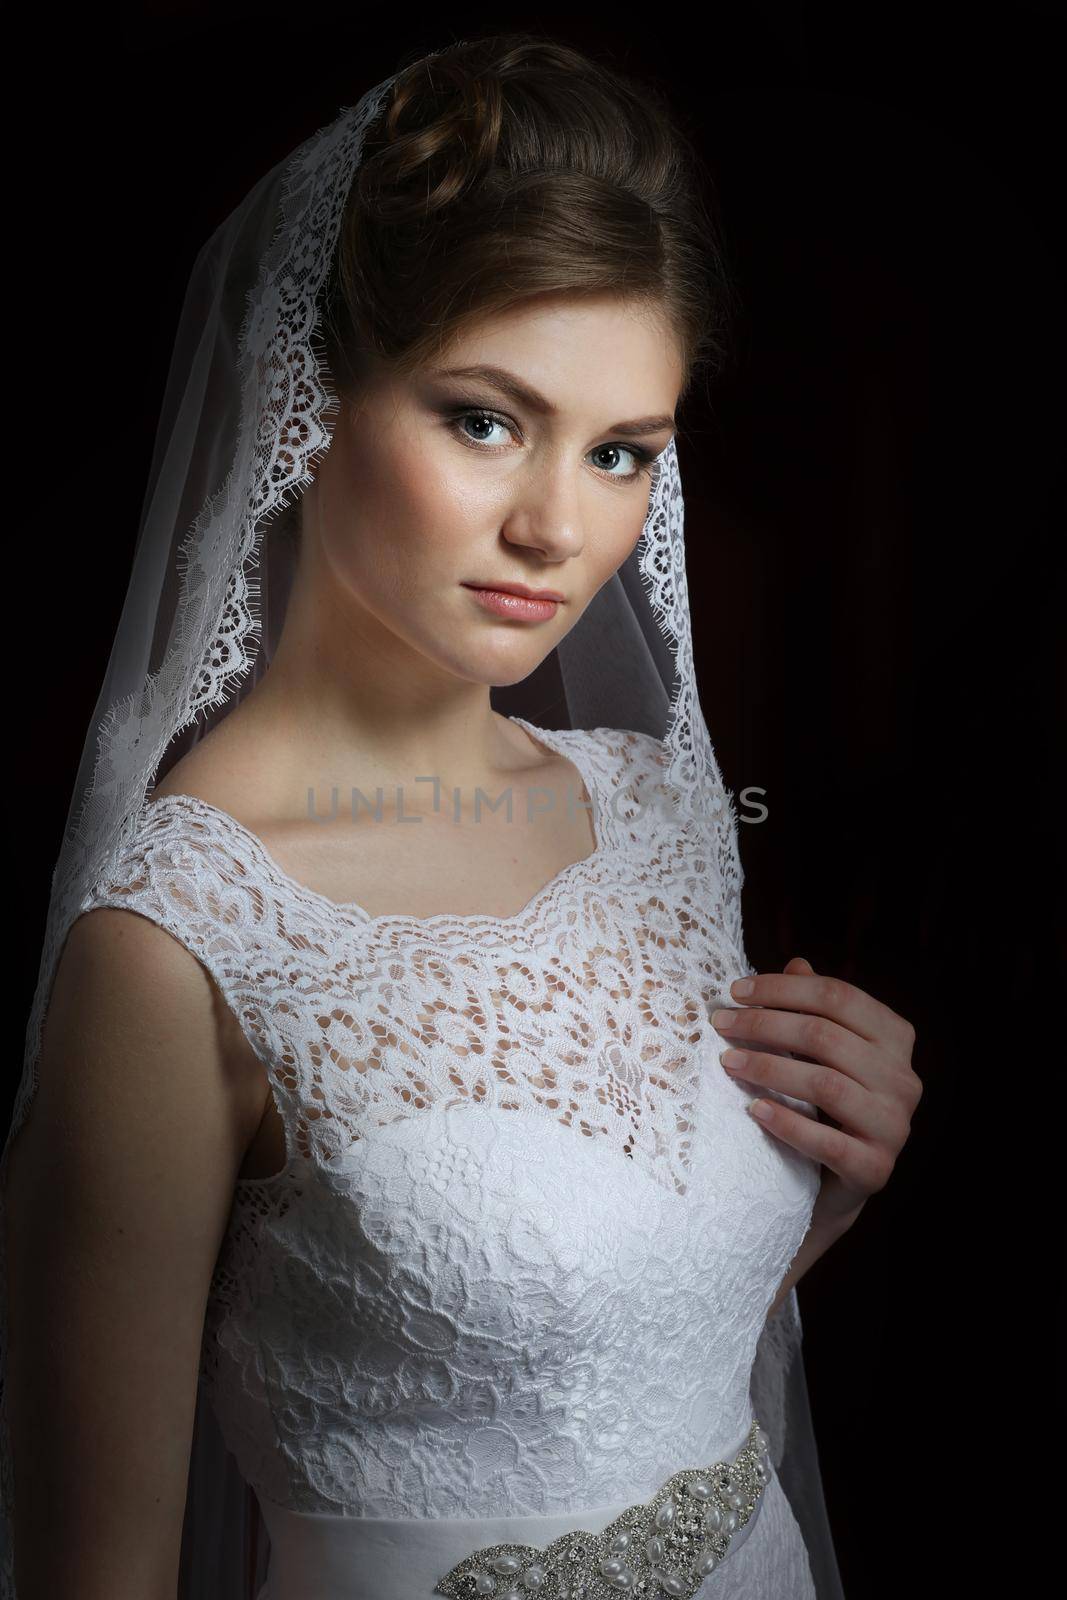 Beautiful bride with a wedding hairstyle - on a dark background. Portrait of a gorgeous bride. Wedding. The bride in a white dress holds a veil.